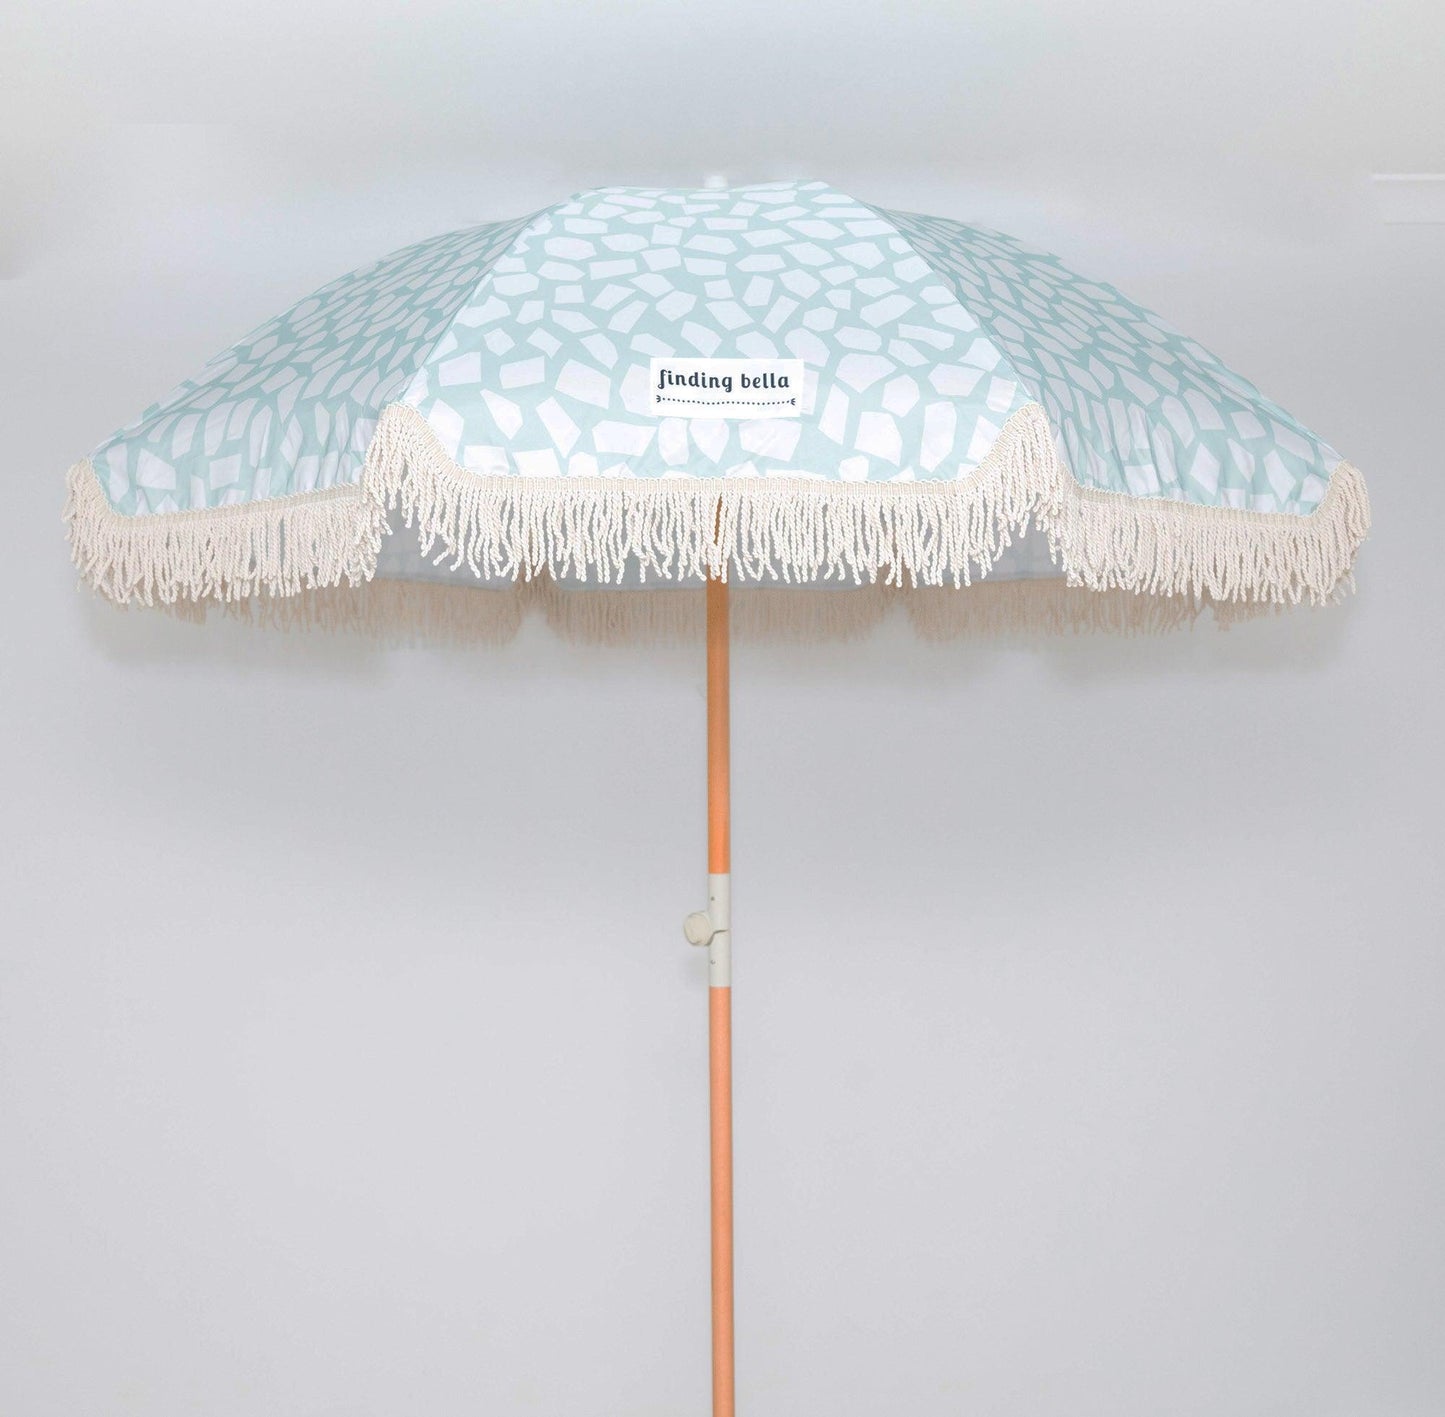 Load image into Gallery viewer, UV Protective Beach Umbrella with Fringe, Dream Bella - Upper Notch Club
